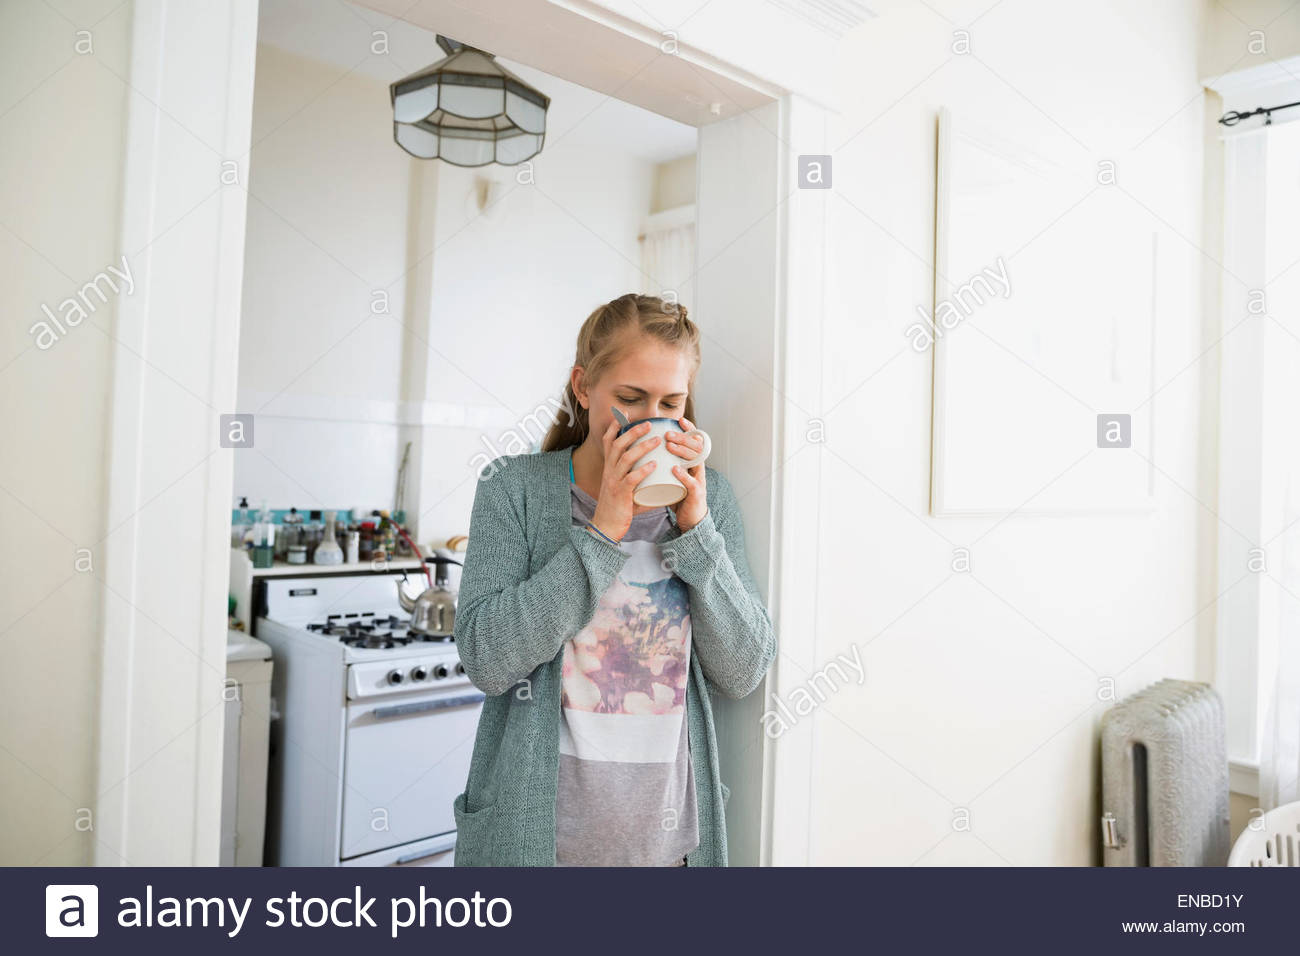 Woman sipping coffee in kitchen doorway Stock Photo